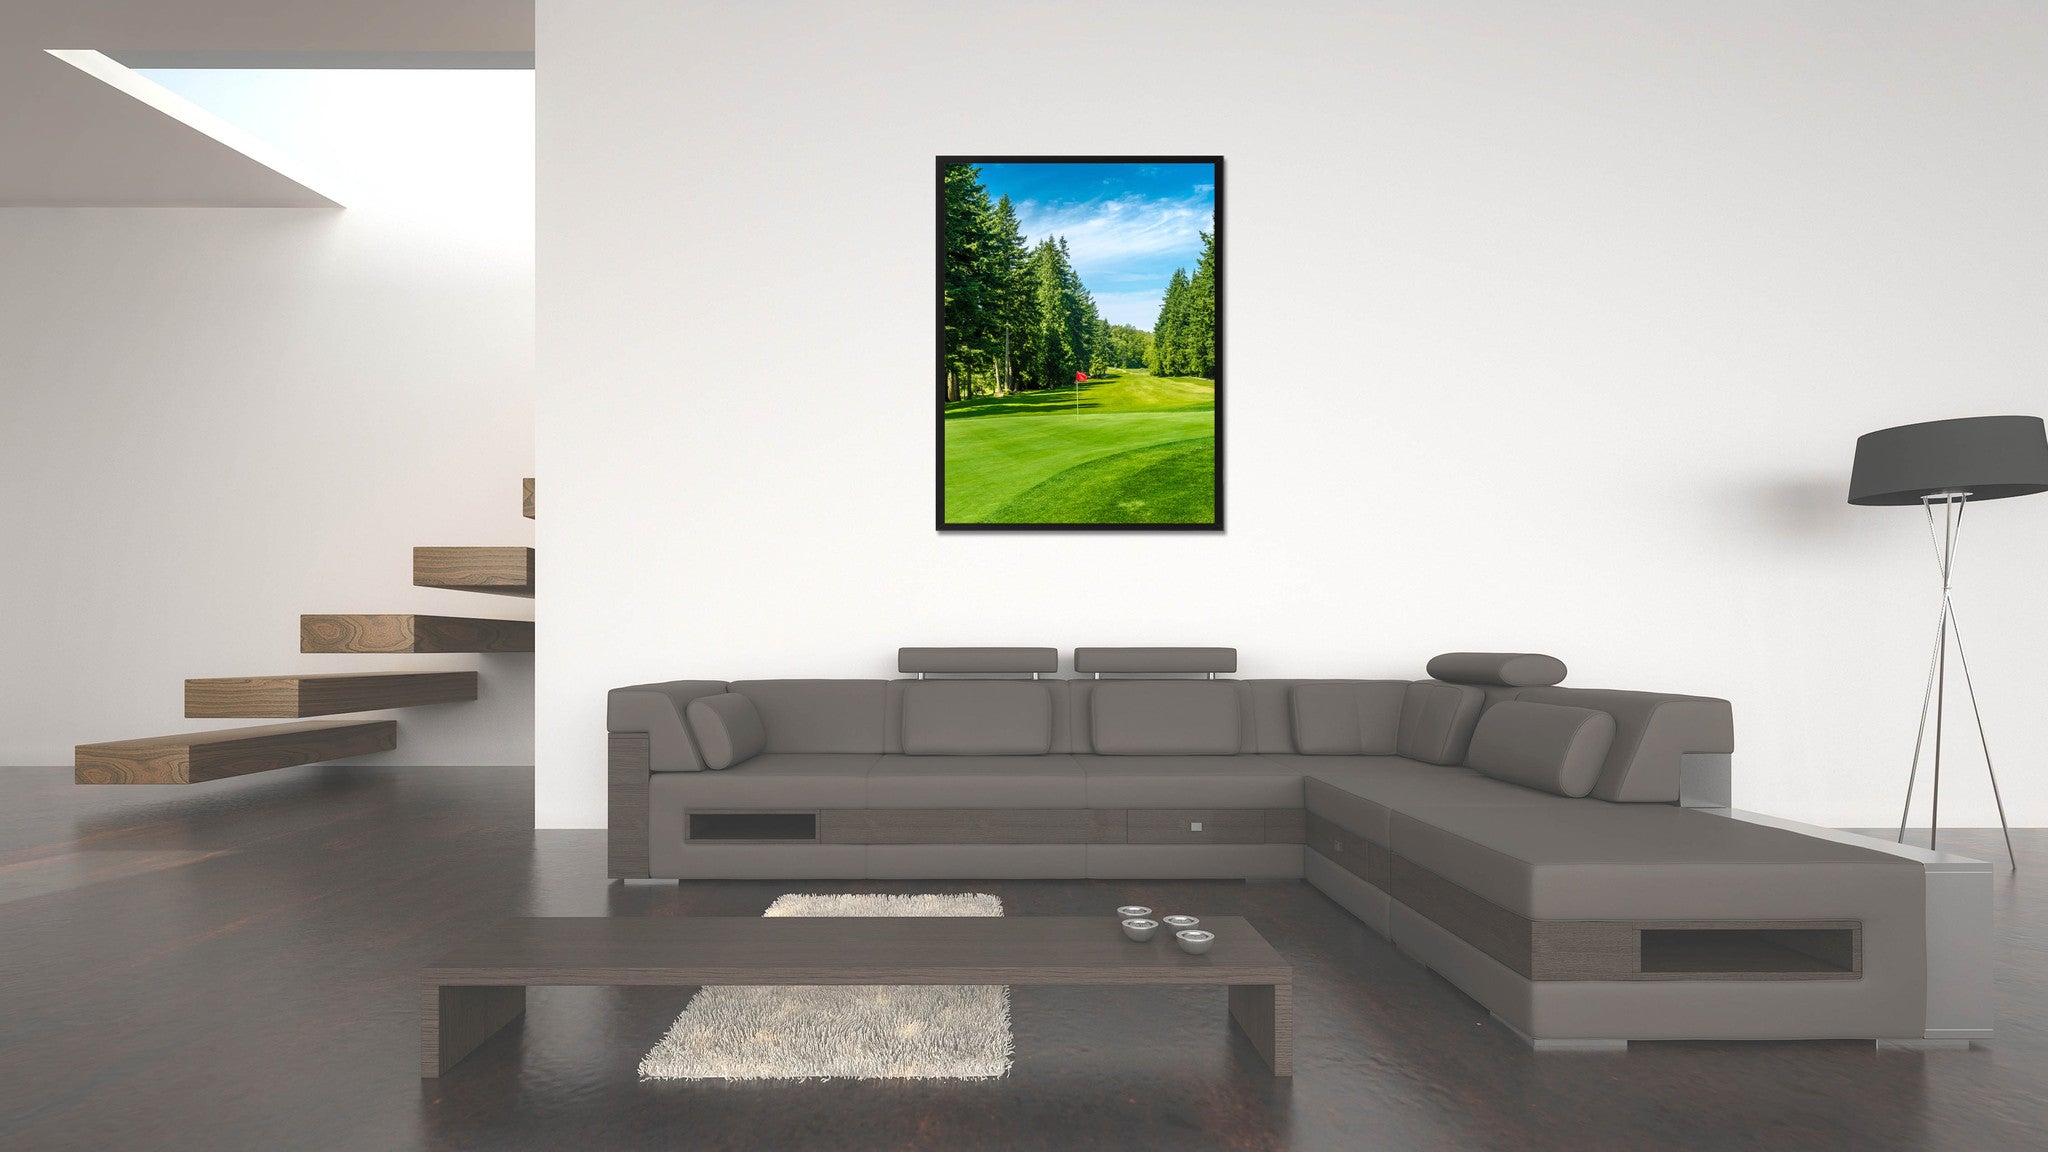 Vancouver Canada Golf Course Photo Canvas Print Pictures Frames Home Décor Wall Art Gifts